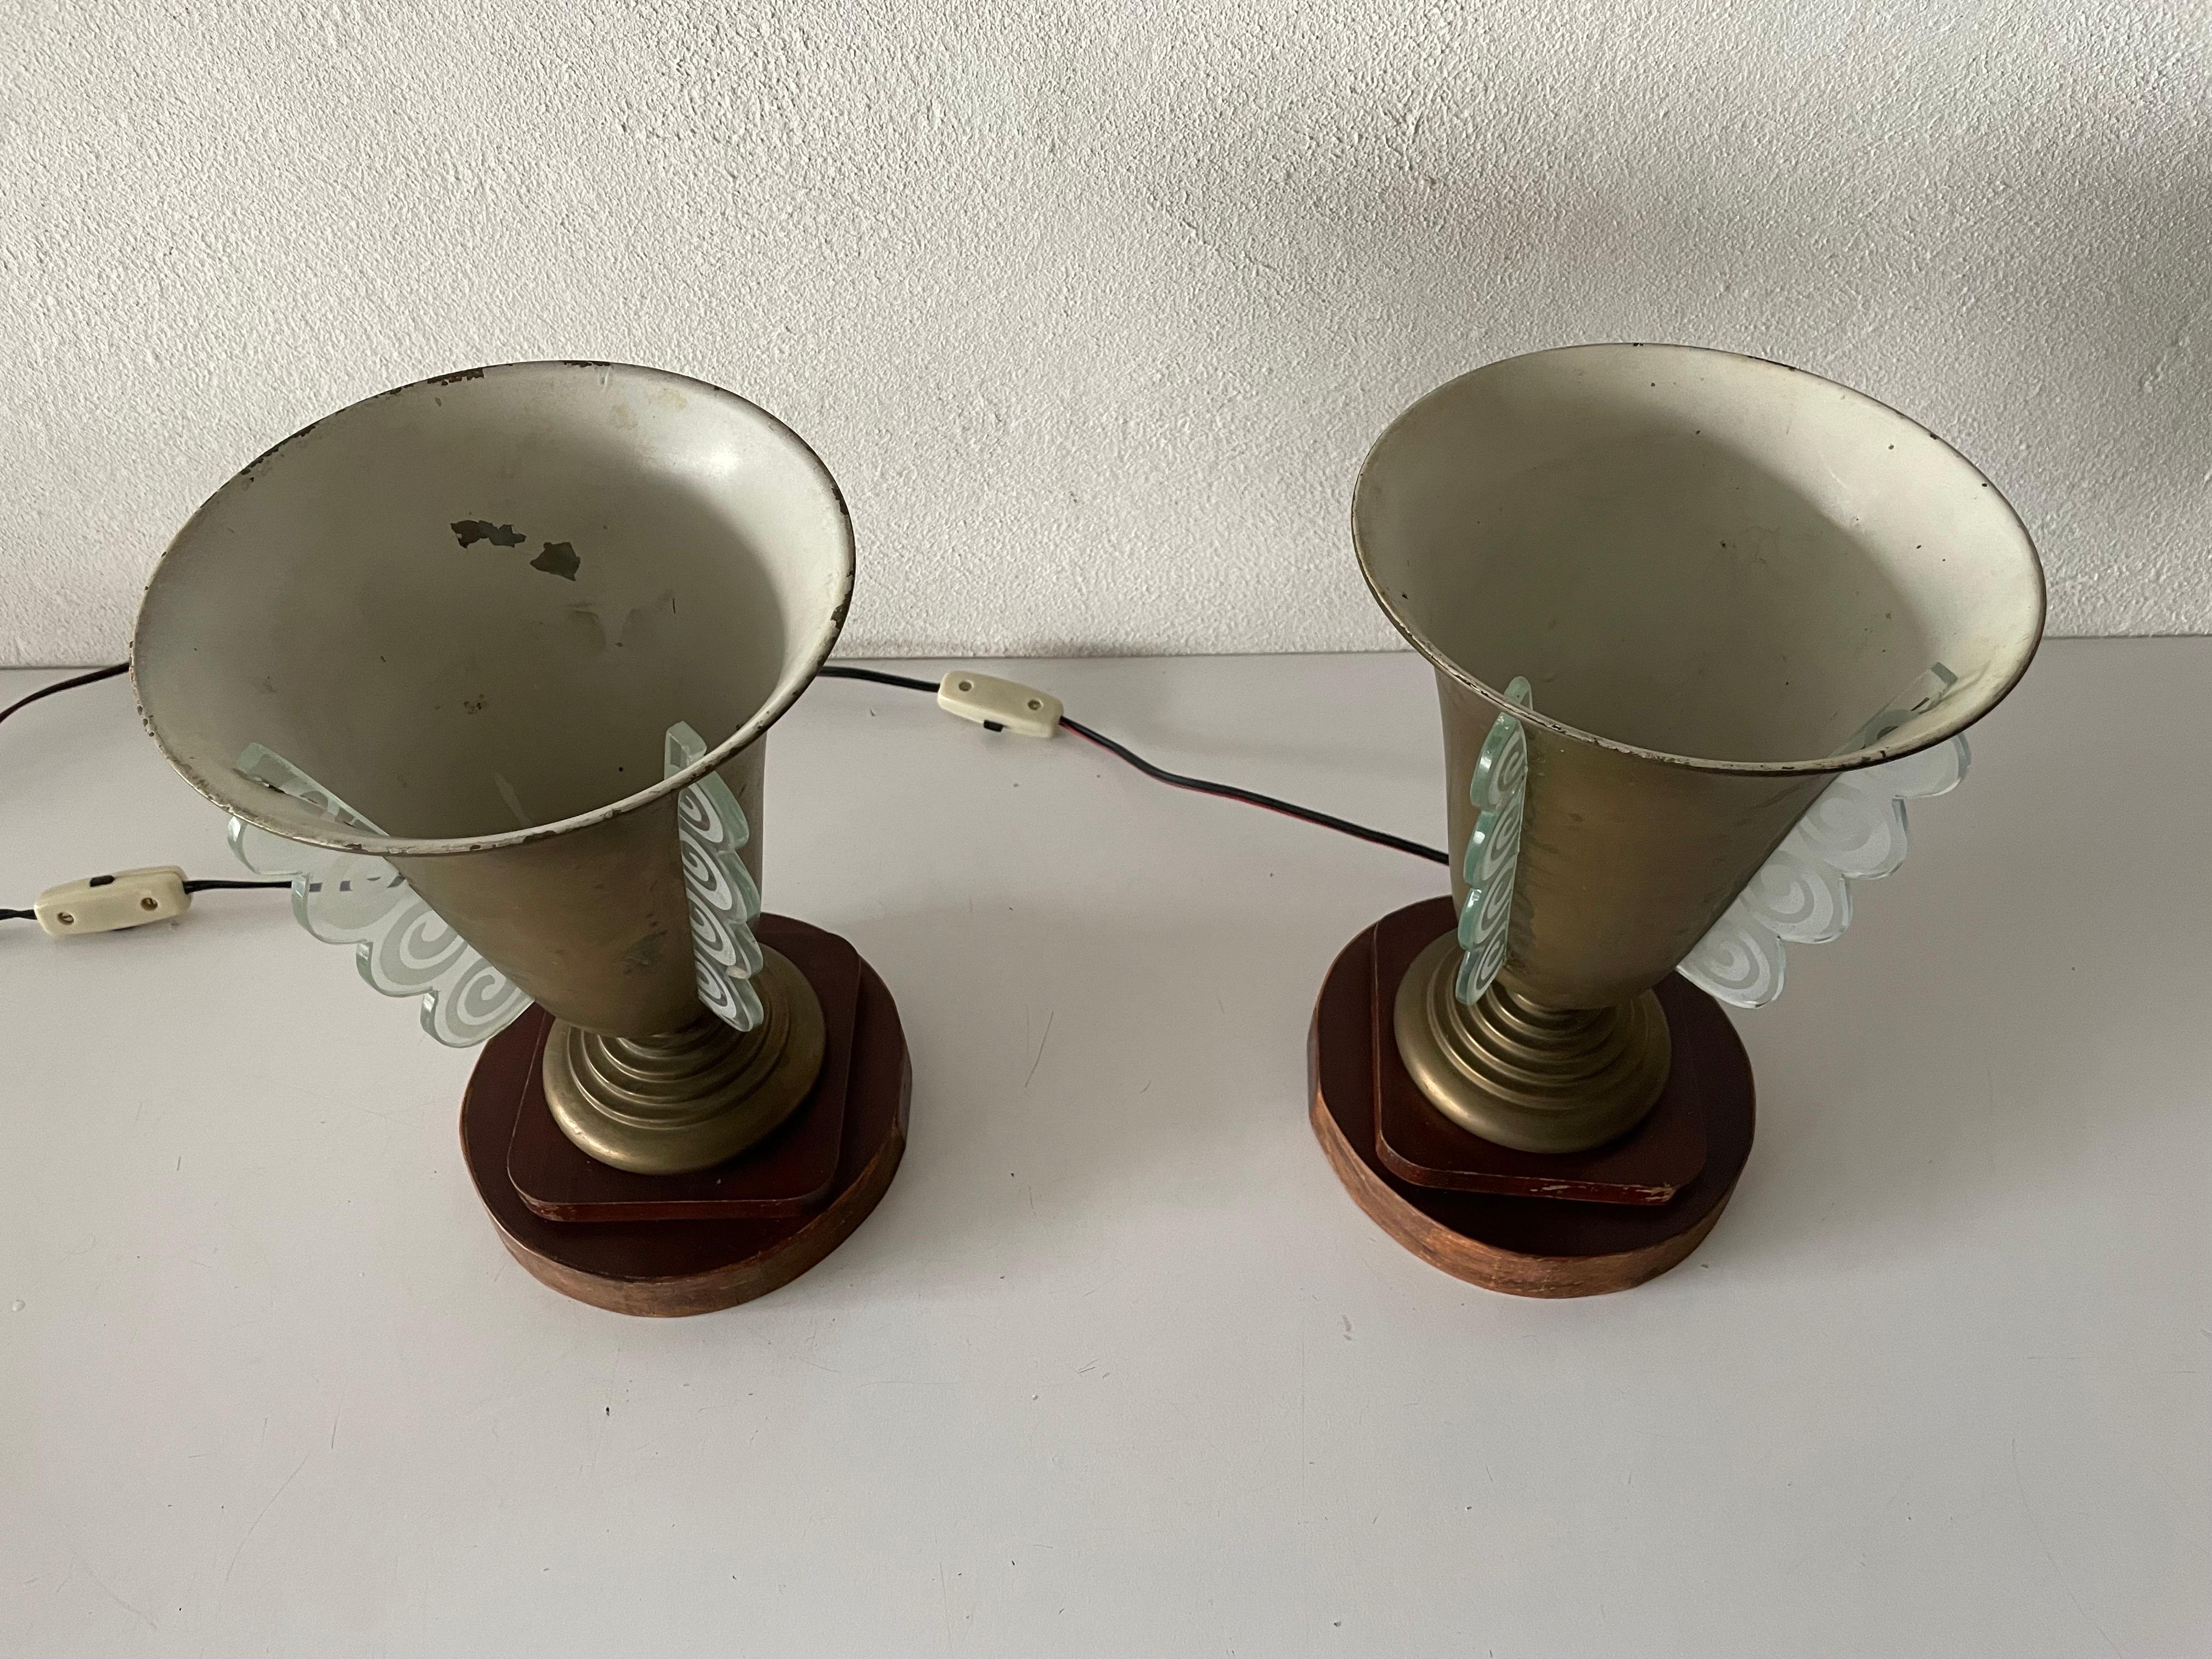 Art Deco Conic Design Pair of Table Lamps by Mazda, 1940s, France In Excellent Condition For Sale In Hagenbach, DE